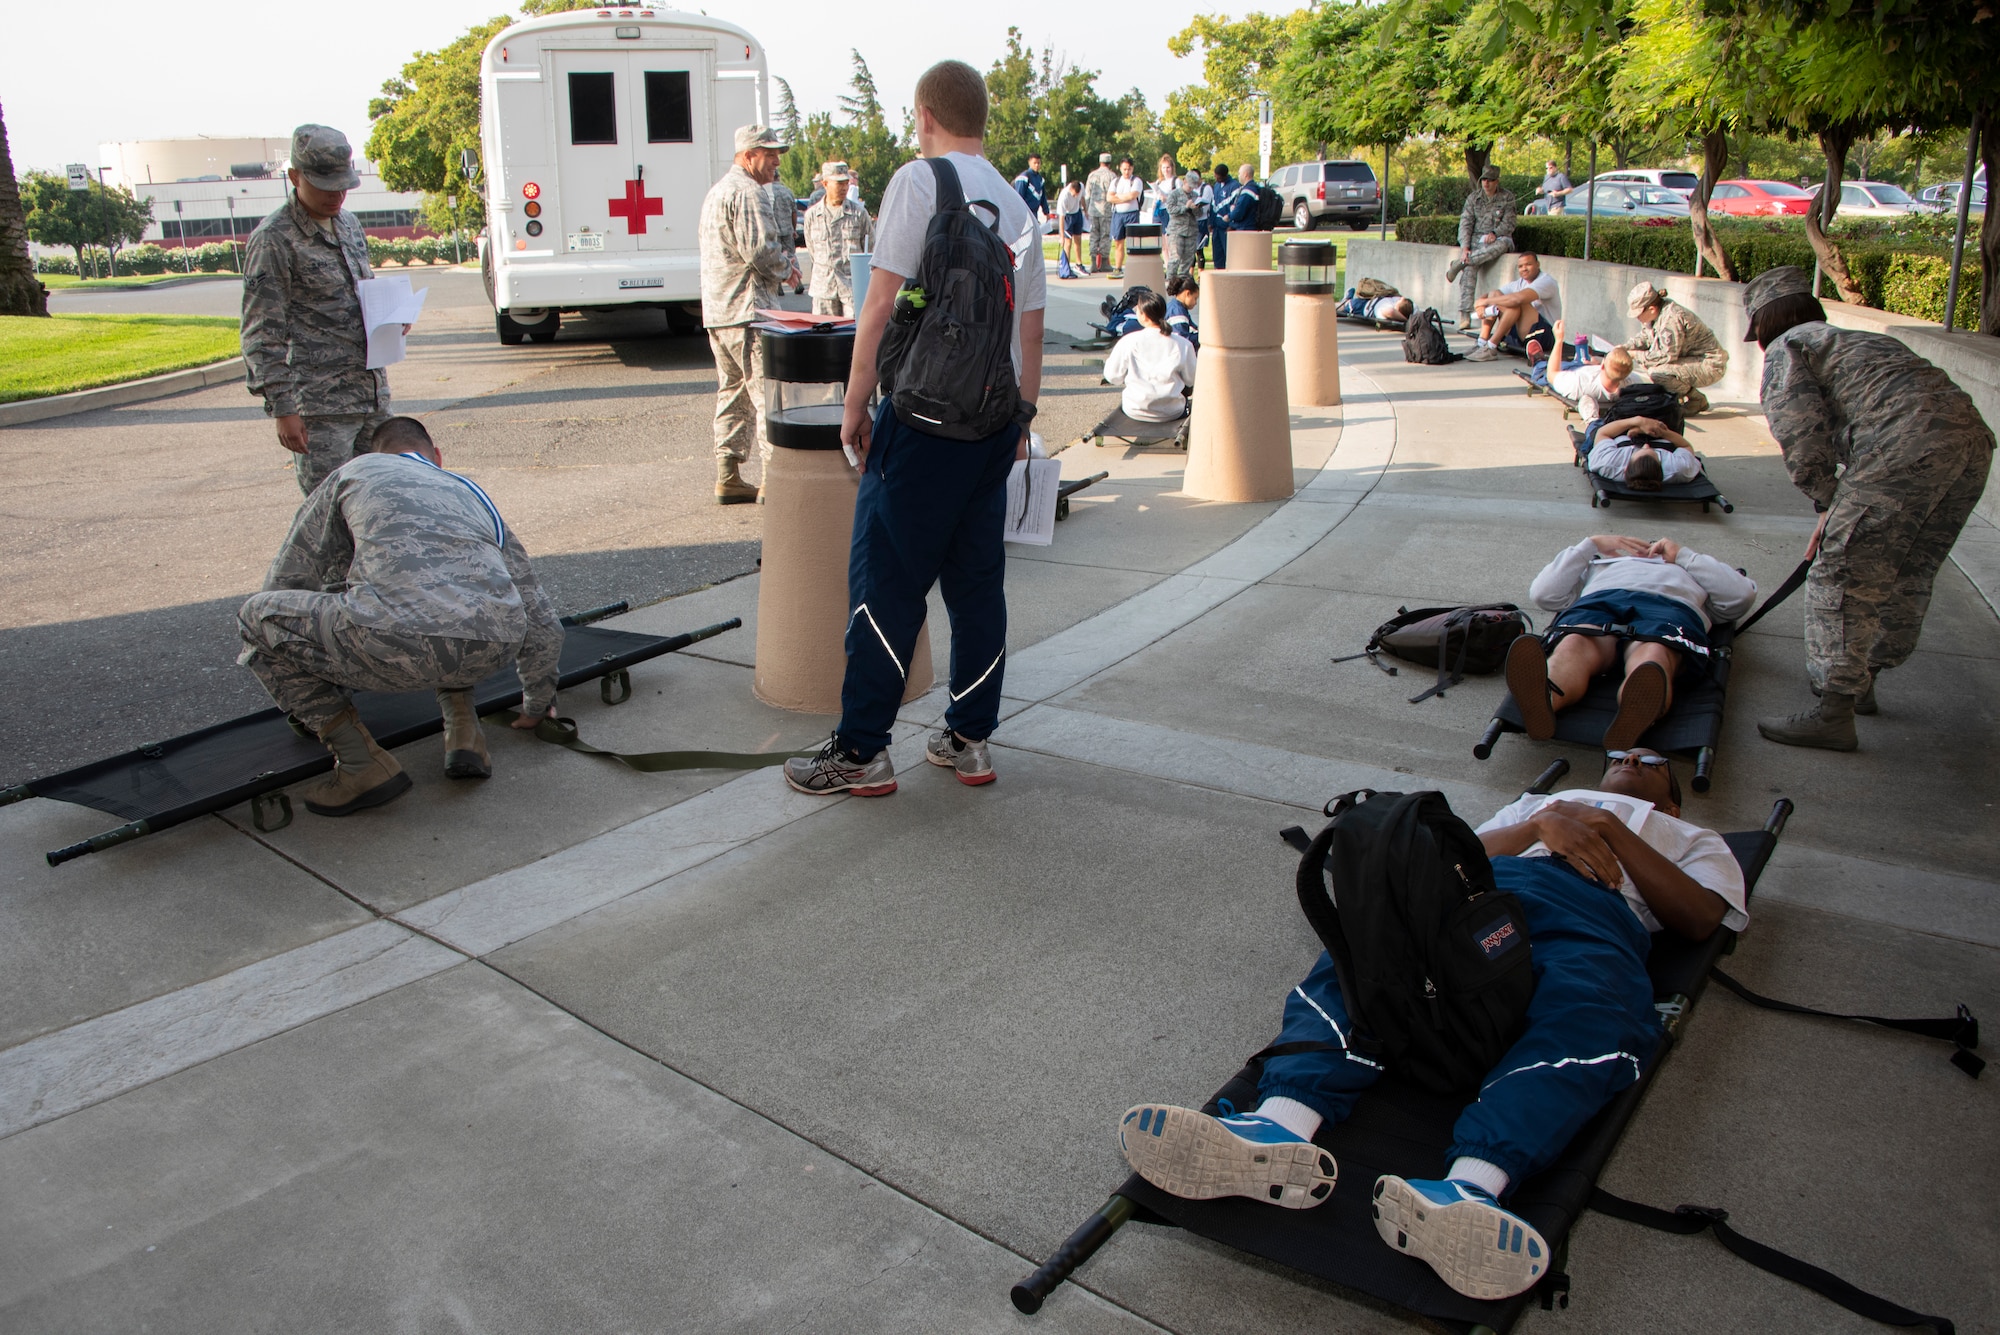 U.S. Air Force Airmen from the 60th Medical Group work to triage and treat simulated patients at David Grant USAF Medical Center during a Casualty Receiving Hospital exercise at Travis Air Force Base, Calif., Aug. 22, 2018. The exercise simulated bringing injured troops from overseas, triaging them at Travis and then moving them to long-term and advanced-care facilities. (U.S. Air Force Photo by Heide Couch)